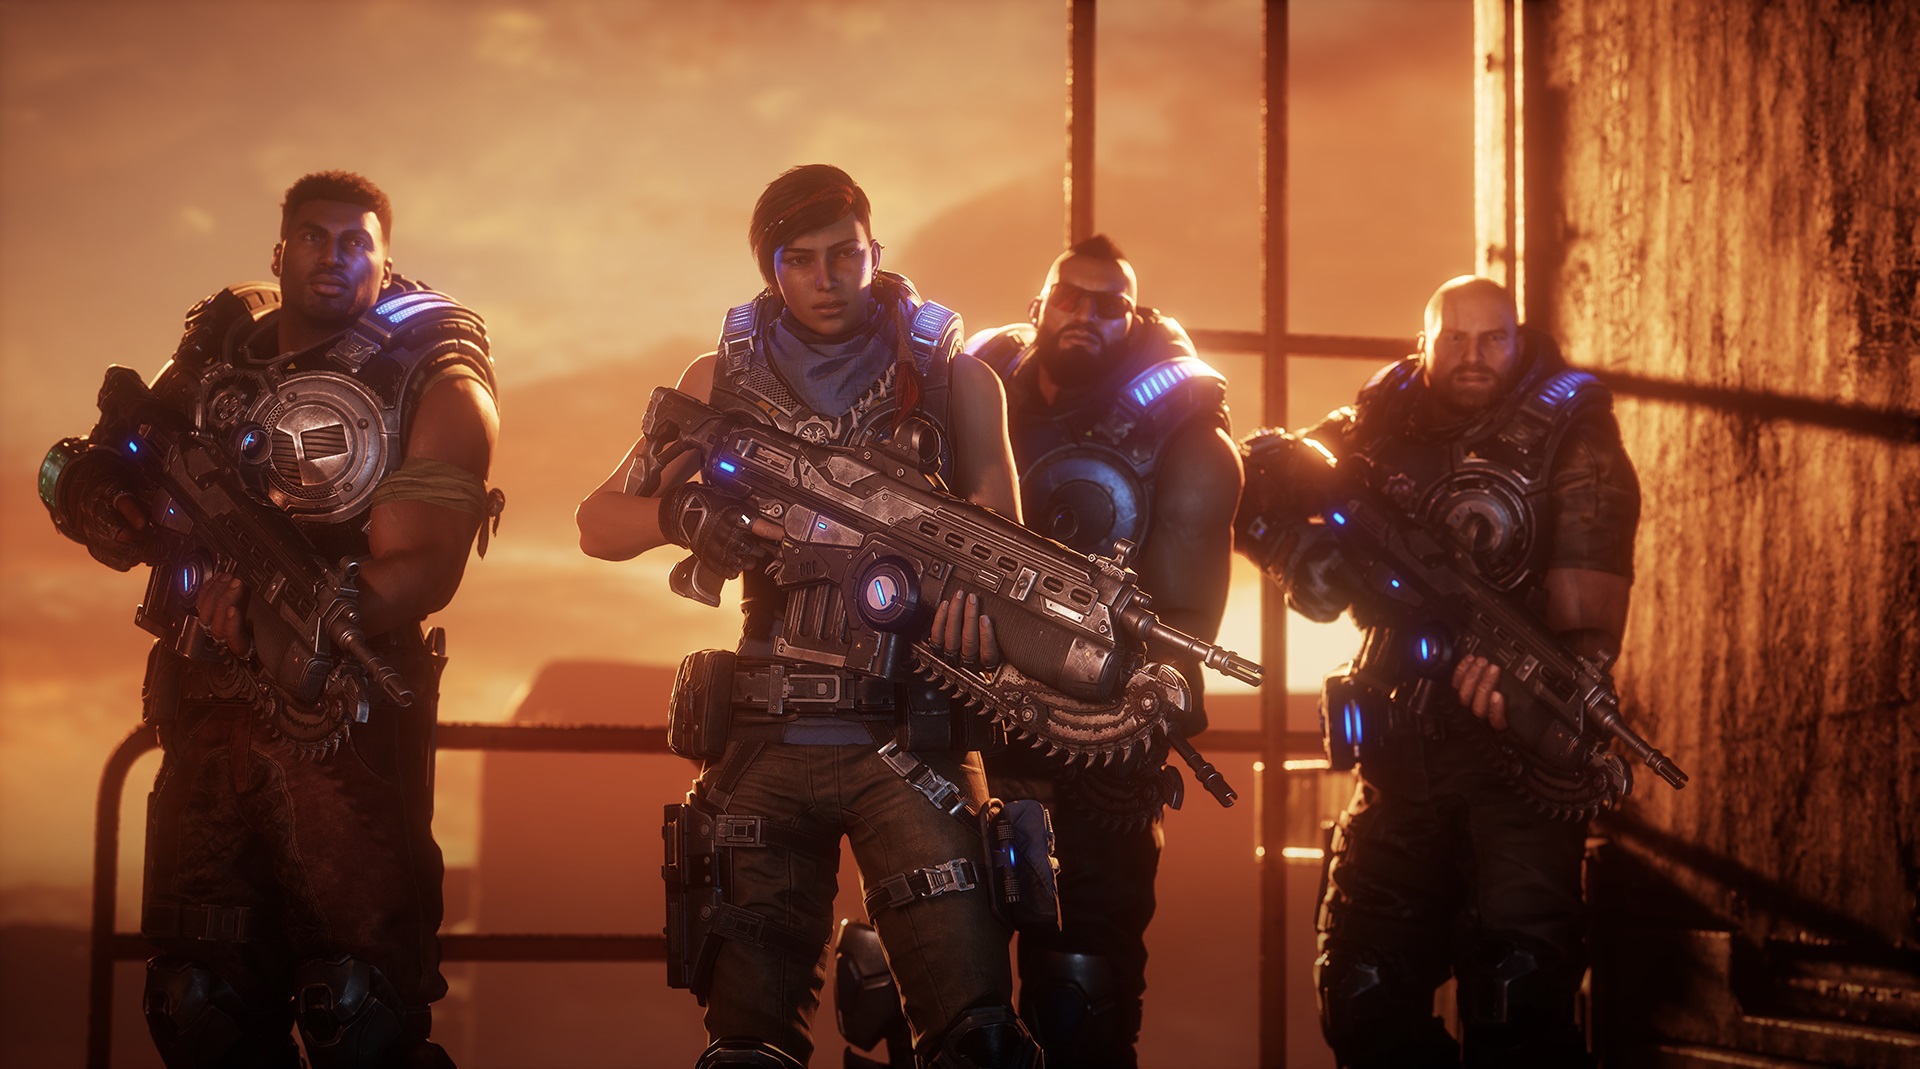 Gears 5 Campaign Hands On: Adding More Chaos to the Bulletstorm